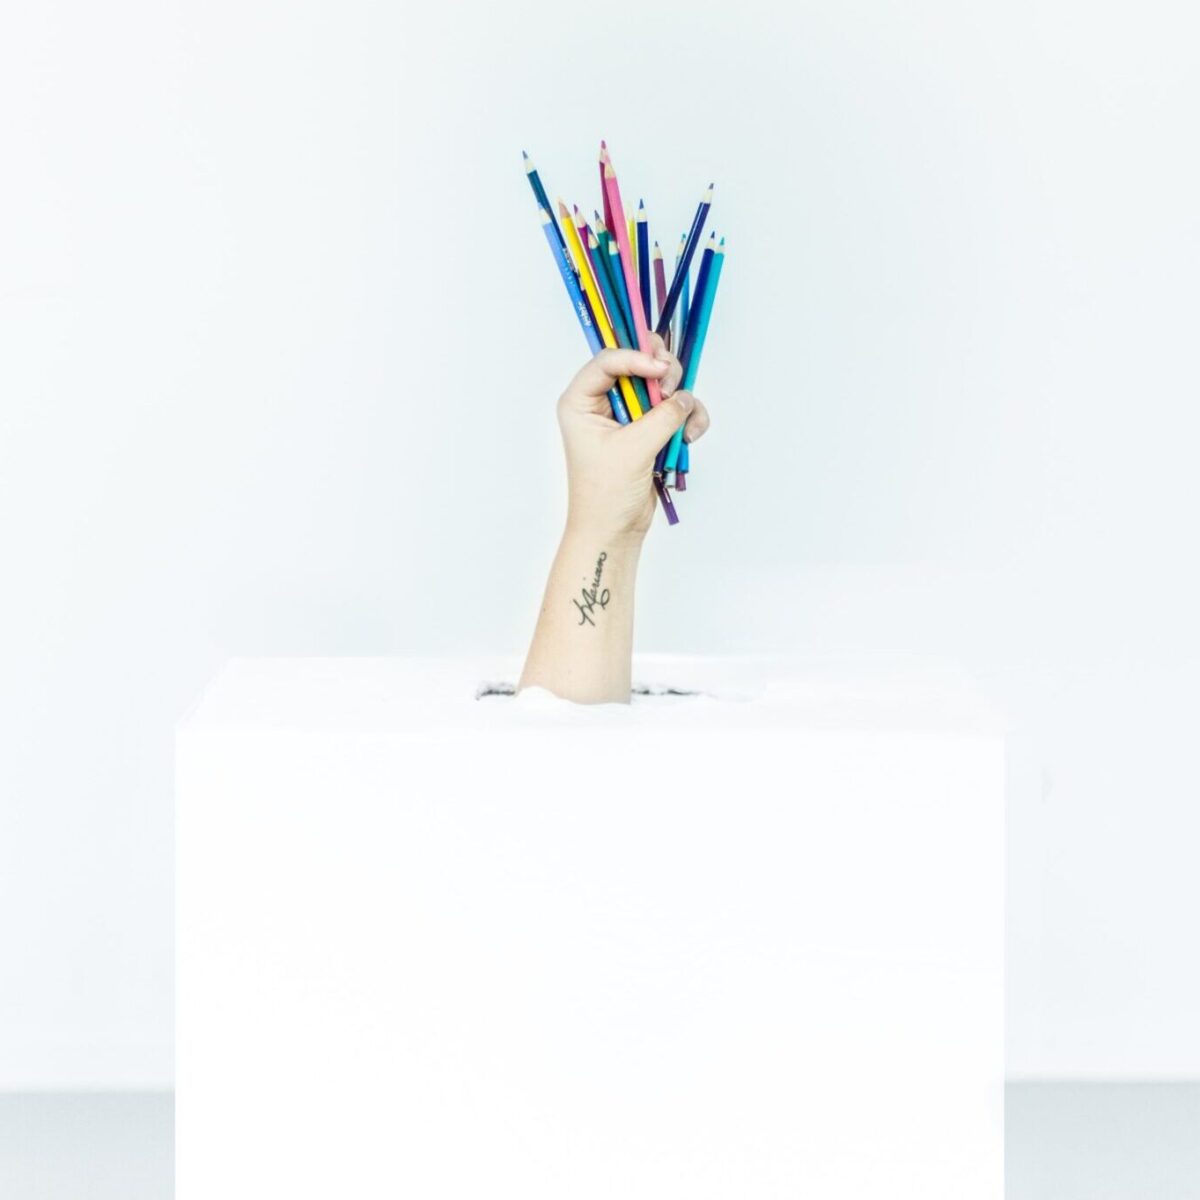 Tattooed hand emerging from a white box holding up different colored pencils